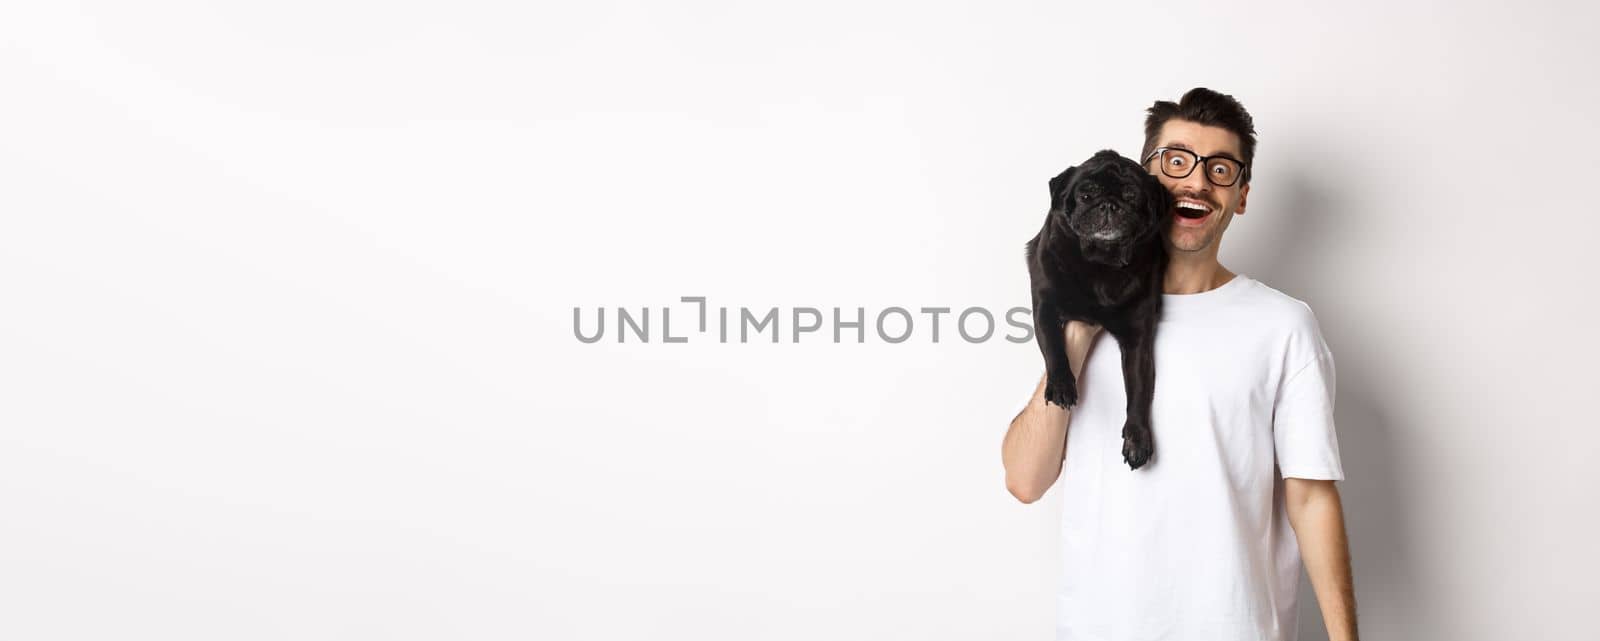 Cheerful hipster guy in glasses and t-shirt, carry cute black pug on shoulder and smiling. Dog owner playing with his pet, standing over white background.